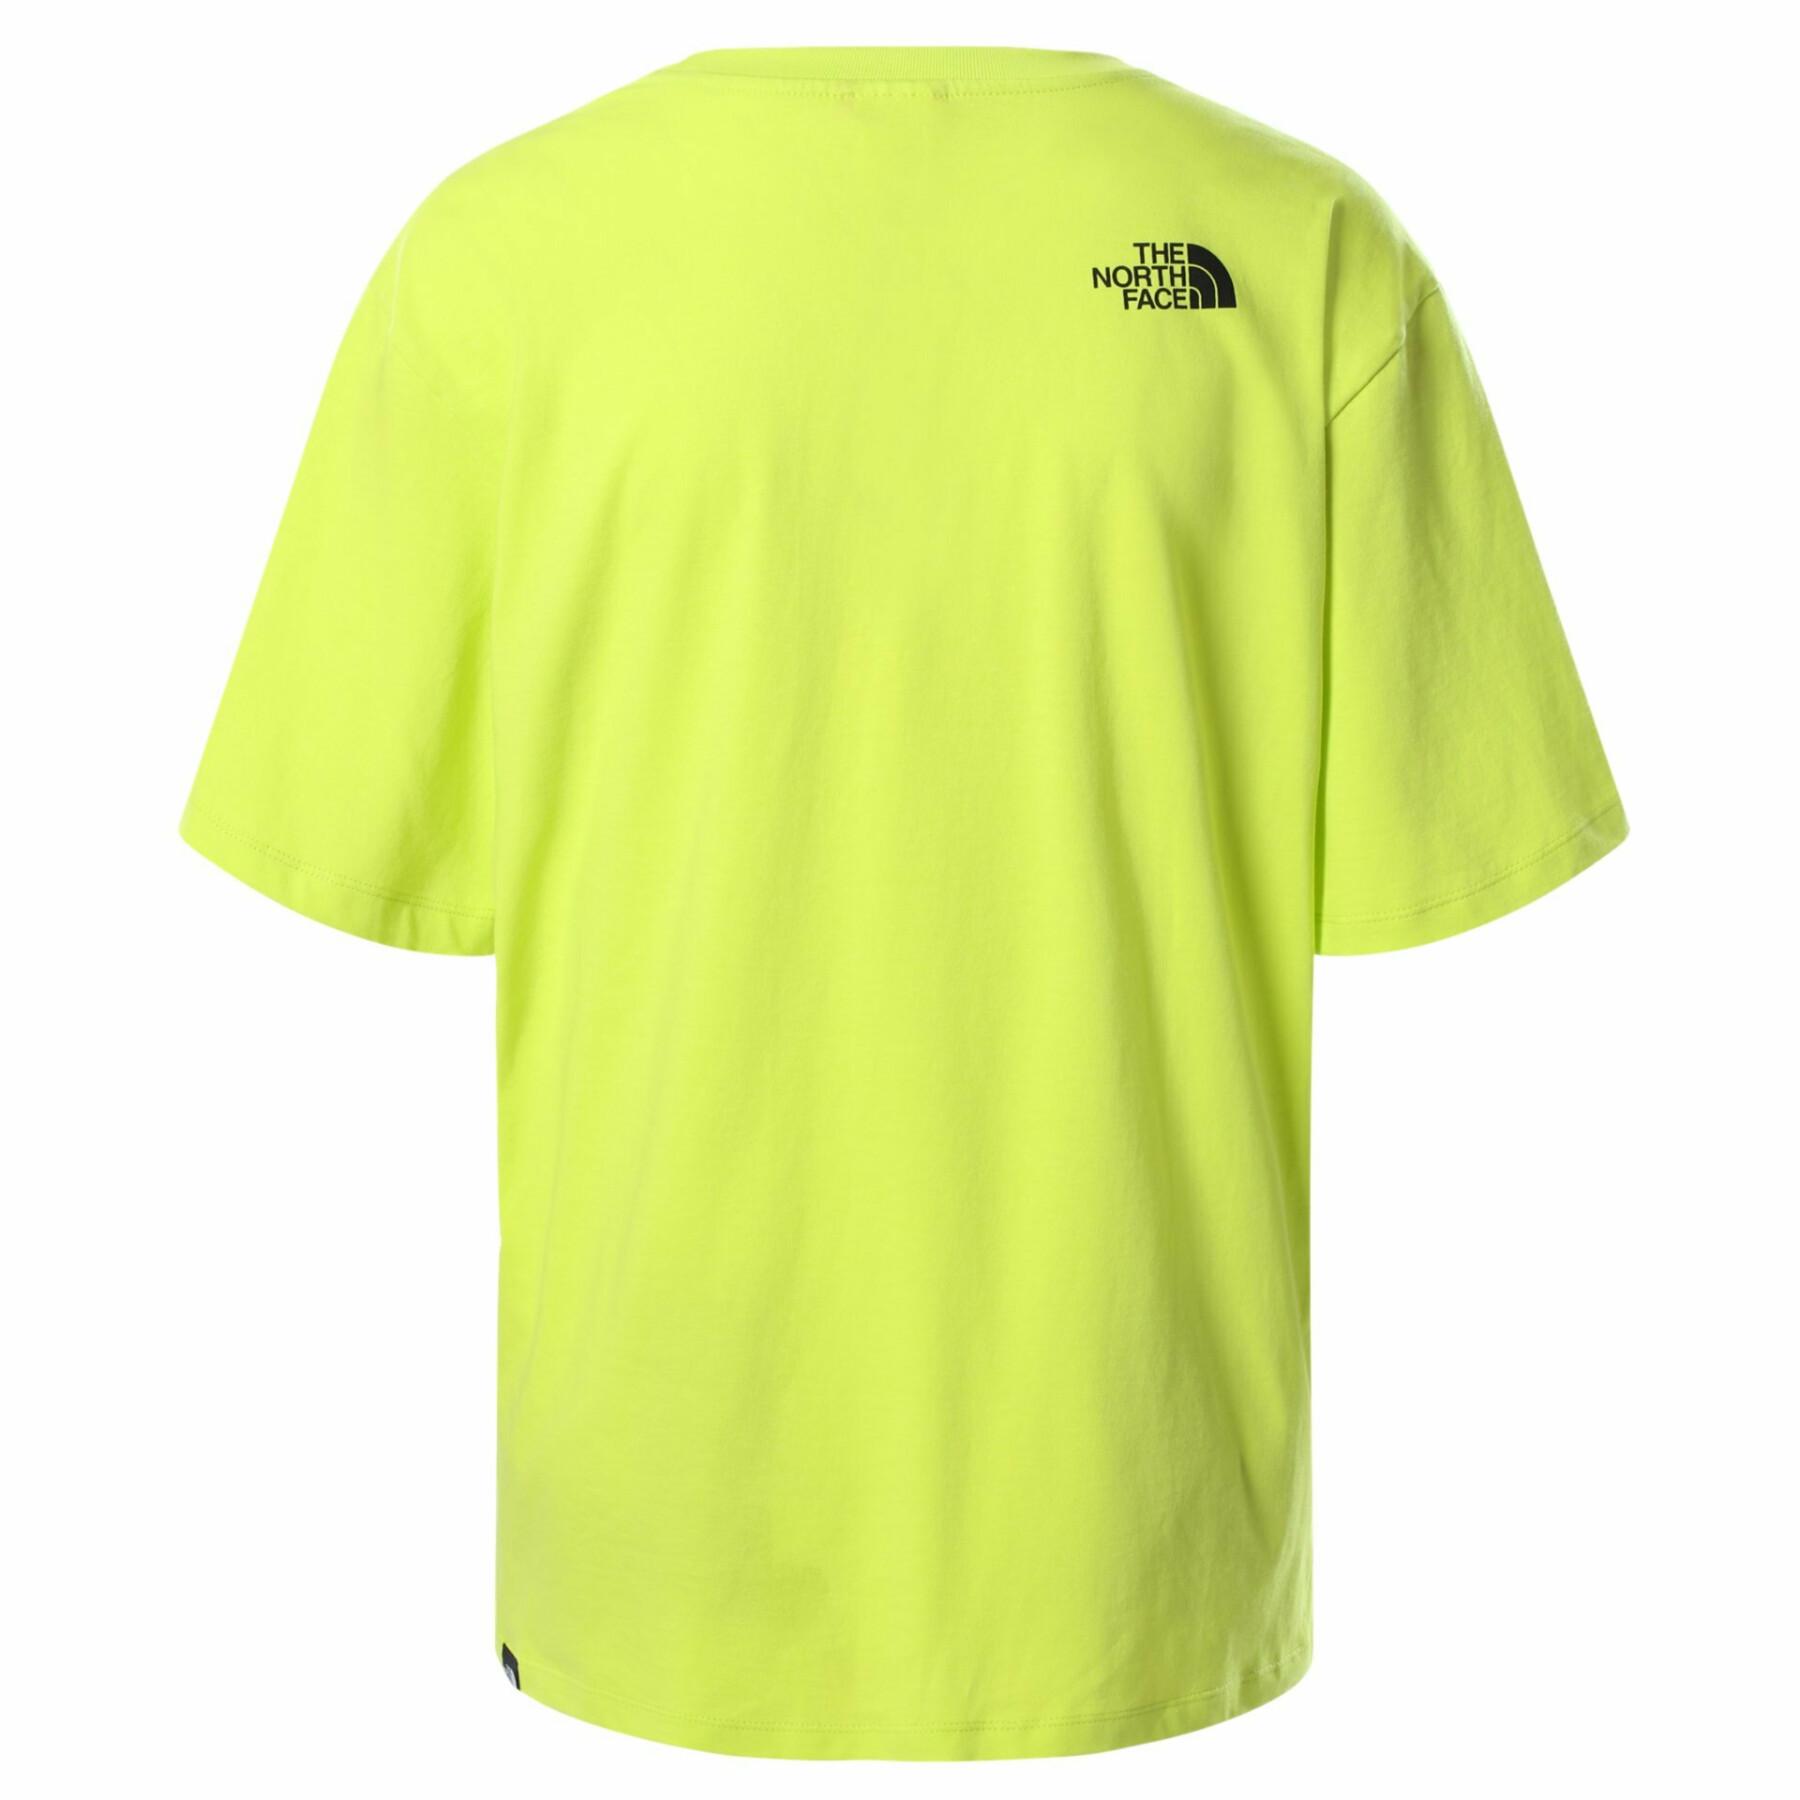 Women's T-shirt The North Face Simple Dome